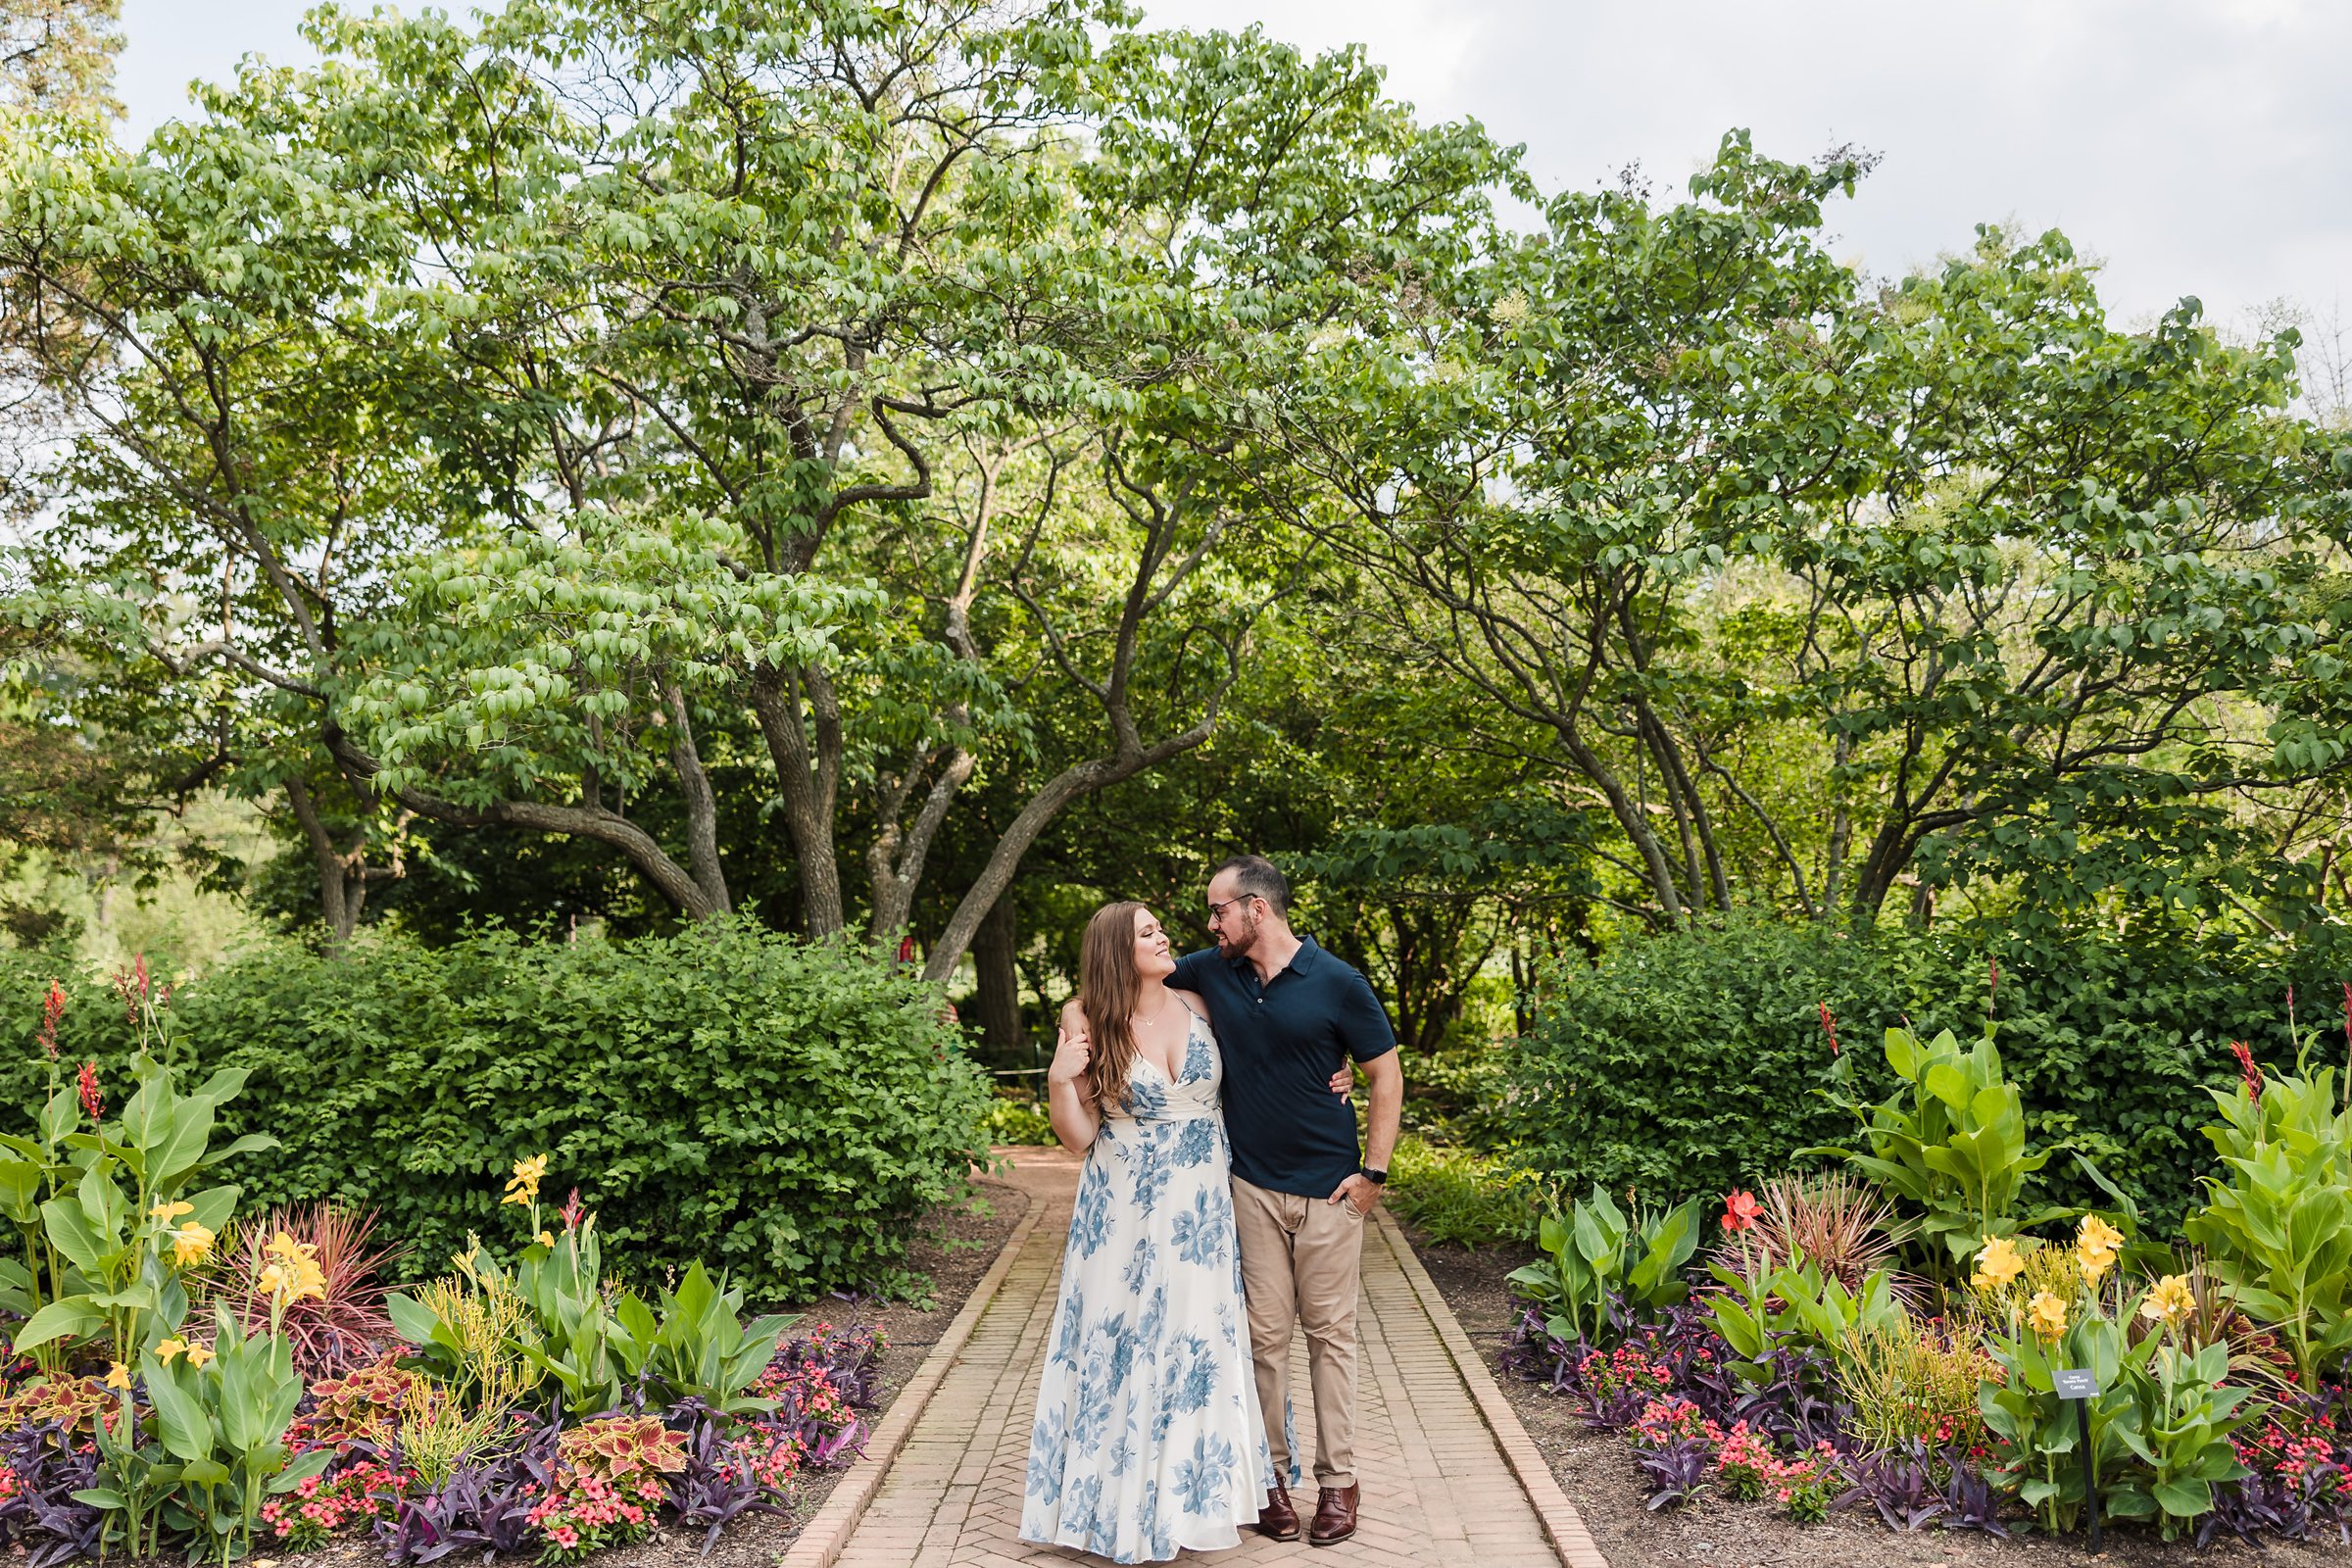 Couple walk together during their engagement session at Cantigny Park in Wheaton, Illinois.